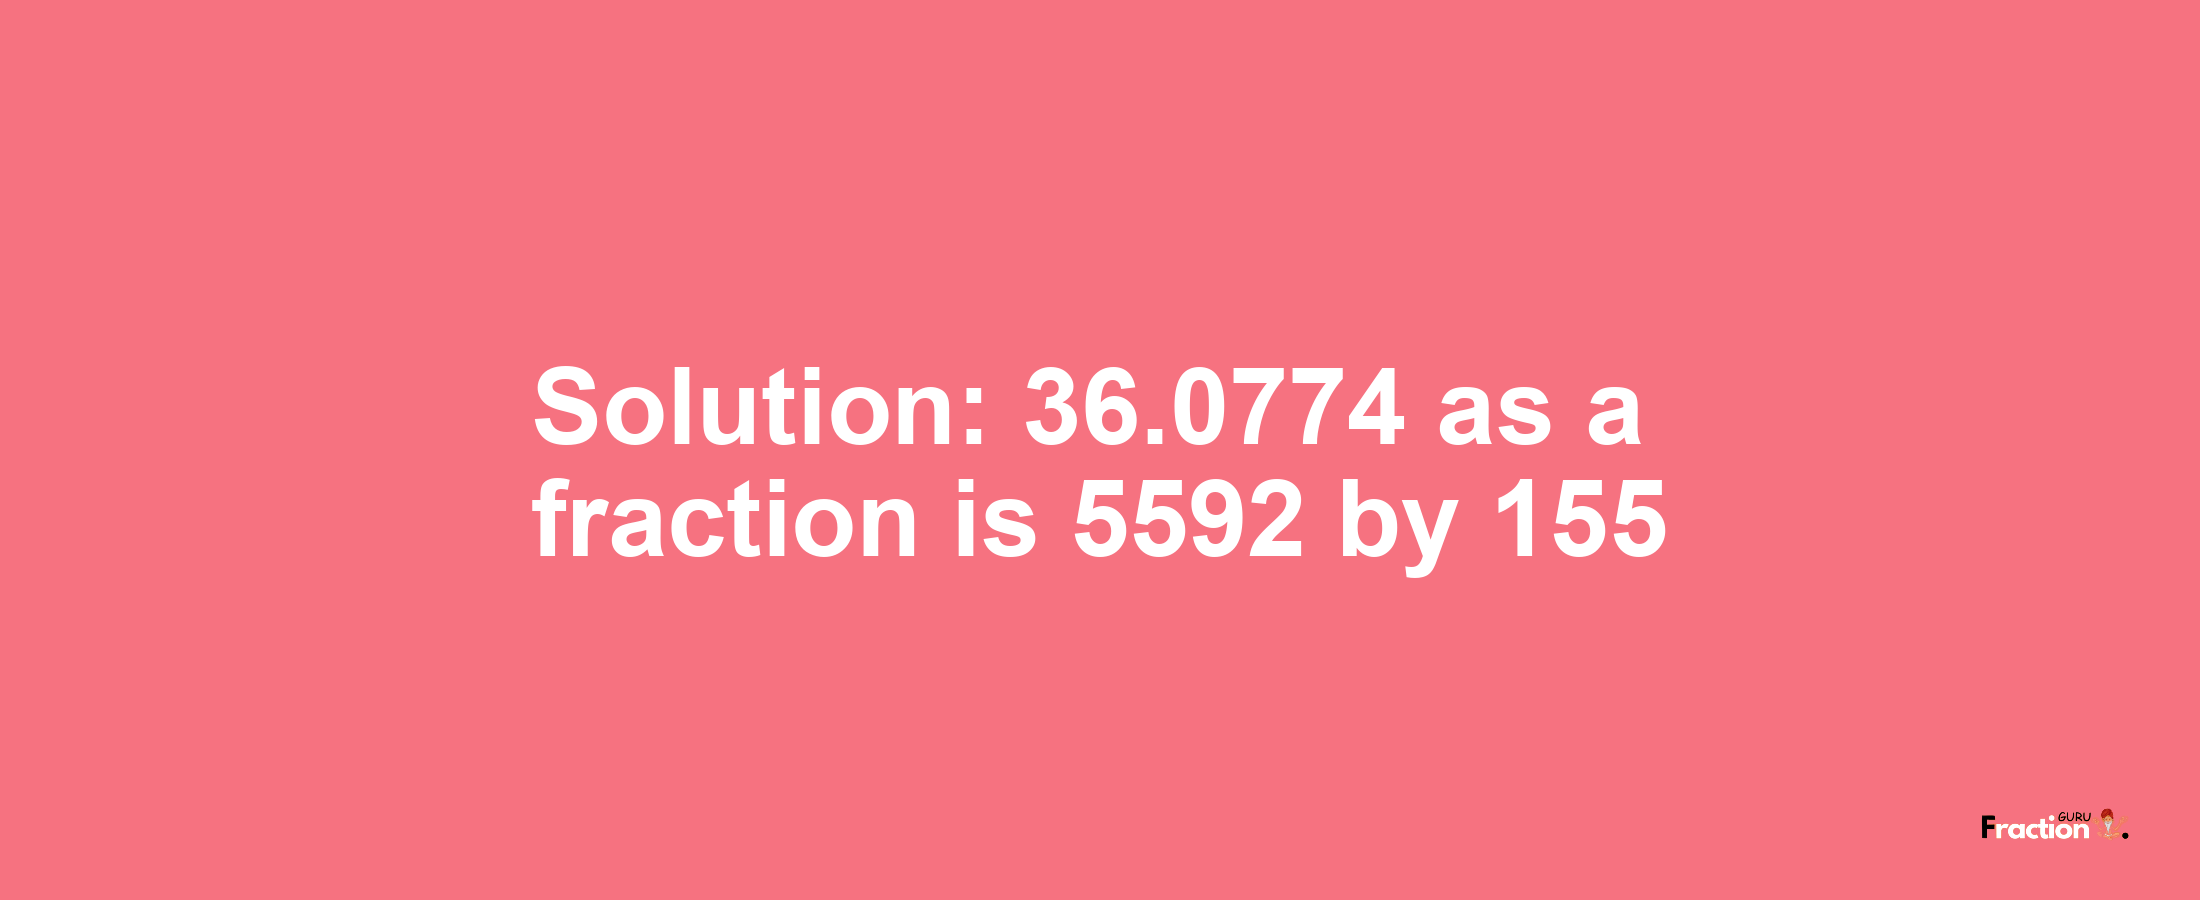 Solution:36.0774 as a fraction is 5592/155